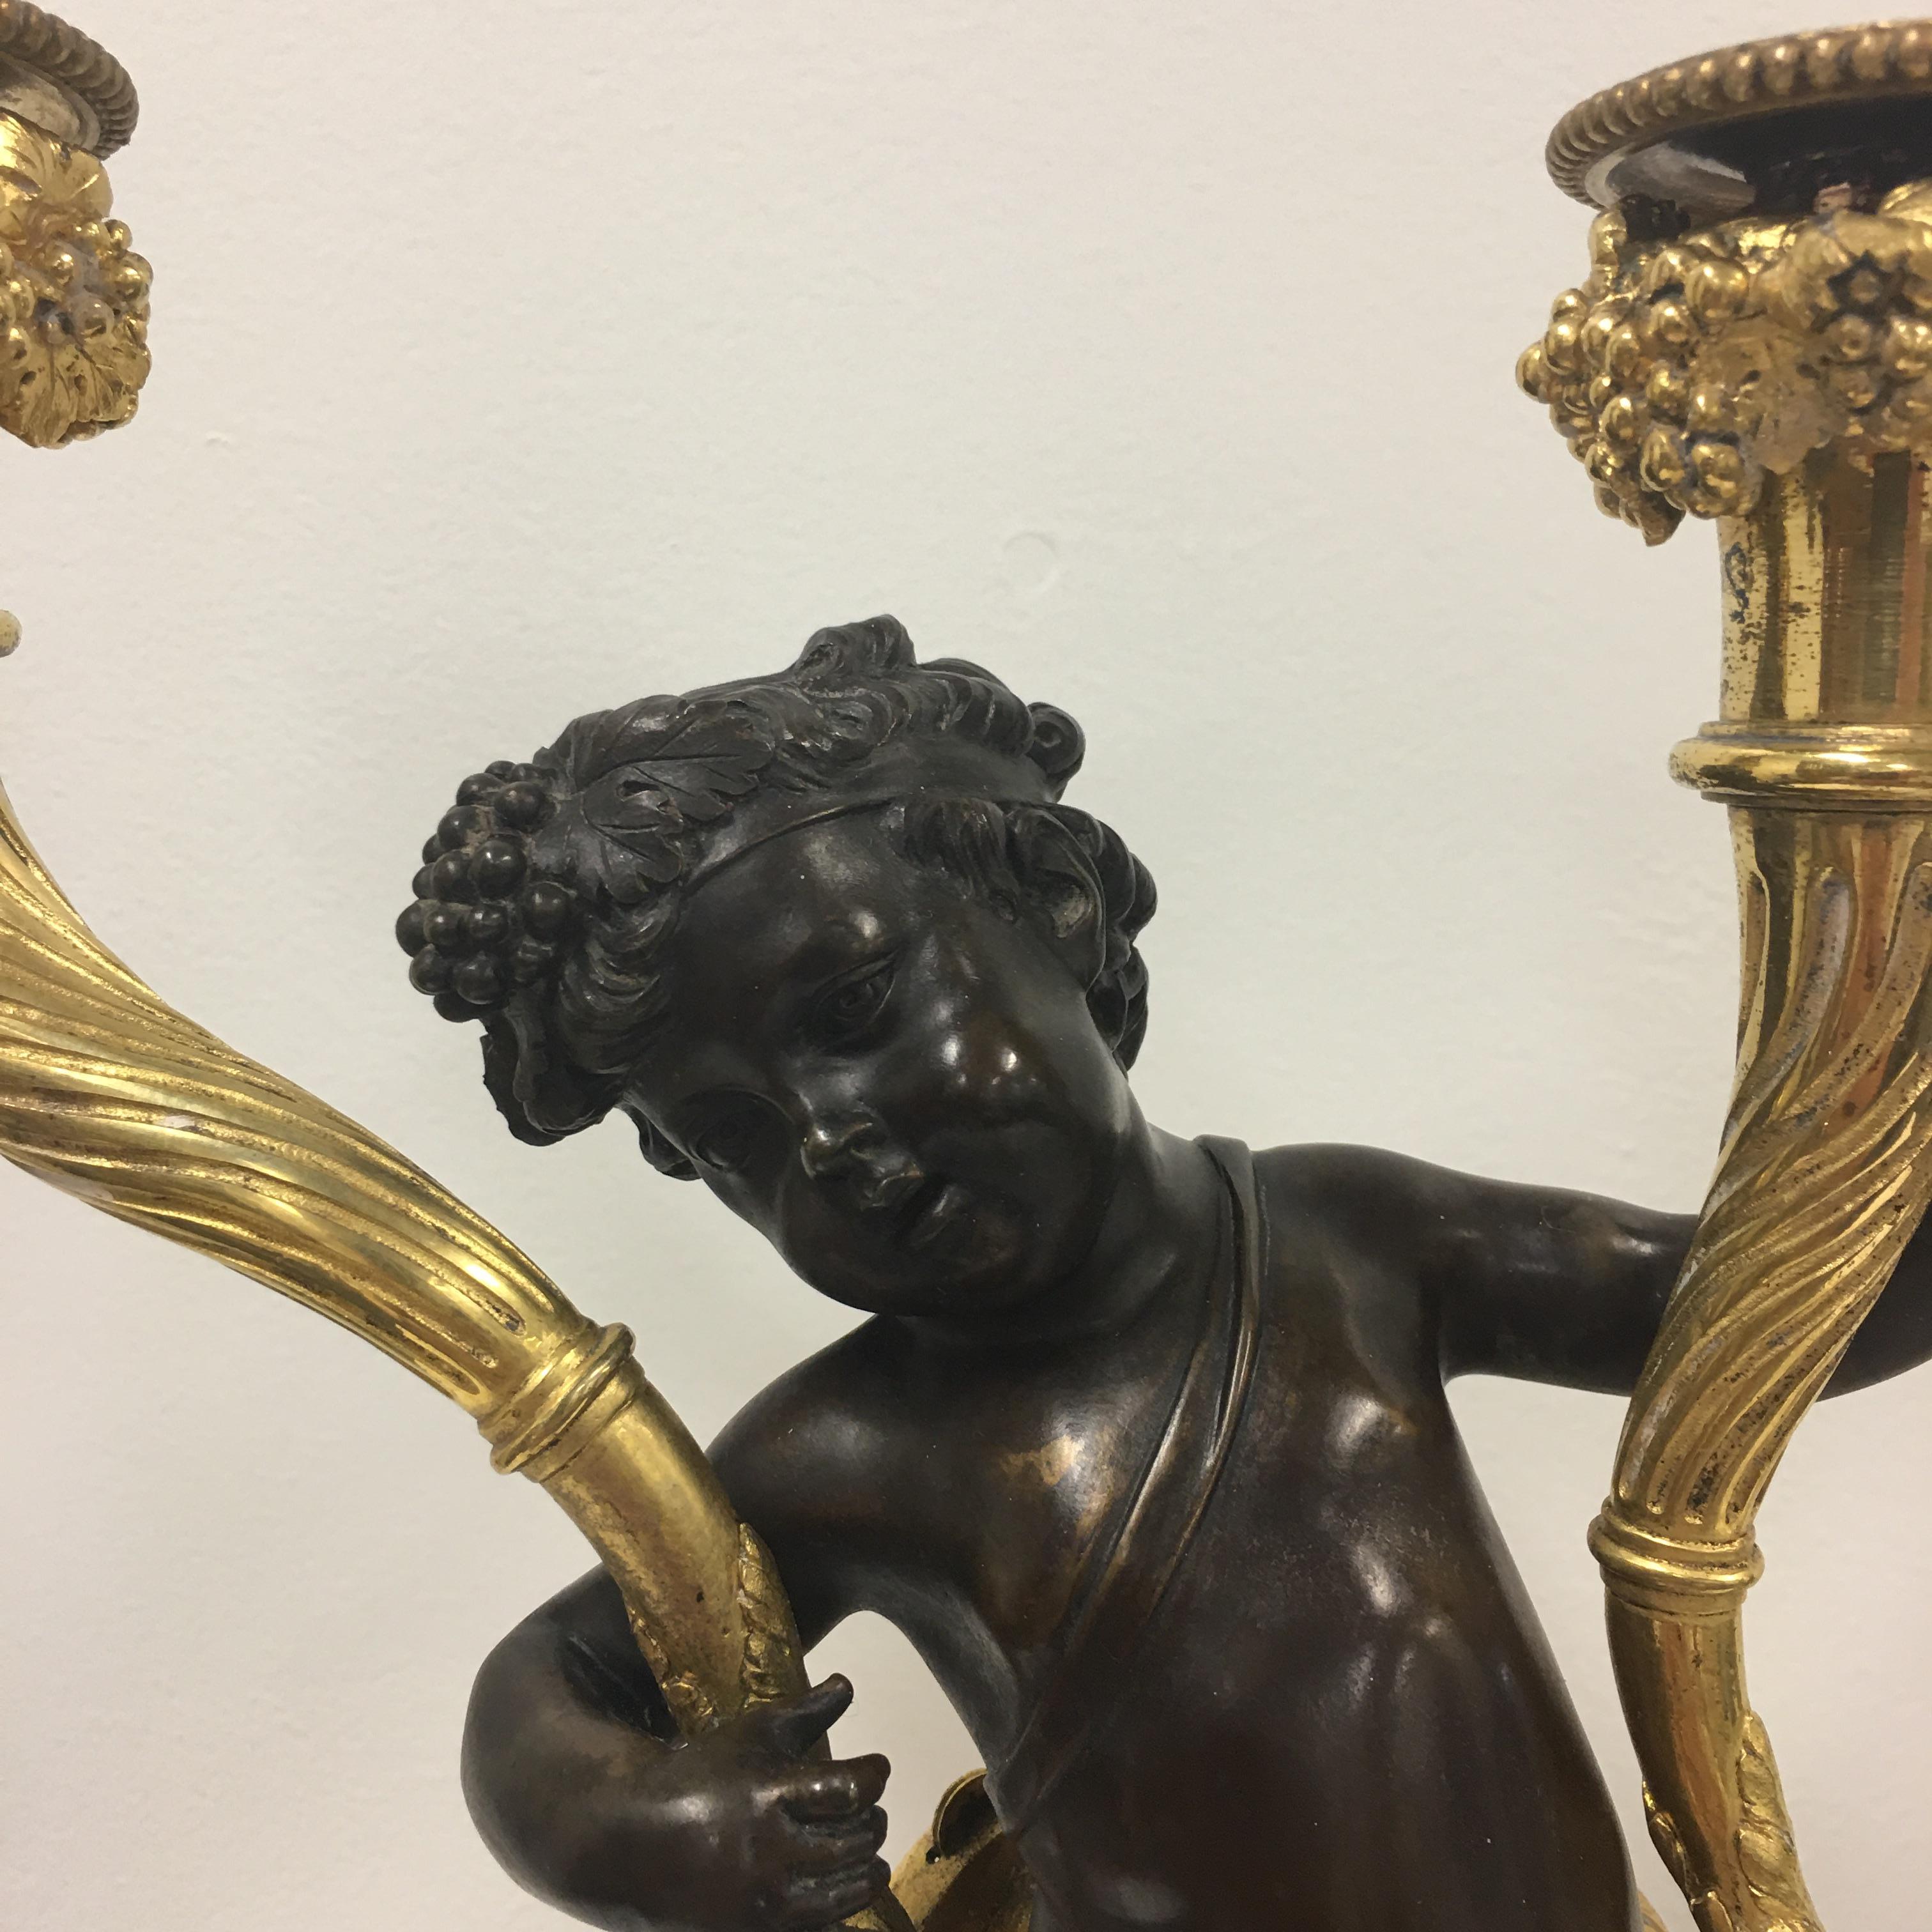 A fine pair of French 18th century Louis XV period, mercury gilt and patinated bronze candelabras.  At the center are charming jubilant cherubs each holding a richly chased branch supporting a single candle cup in each hand.  The cherubs are